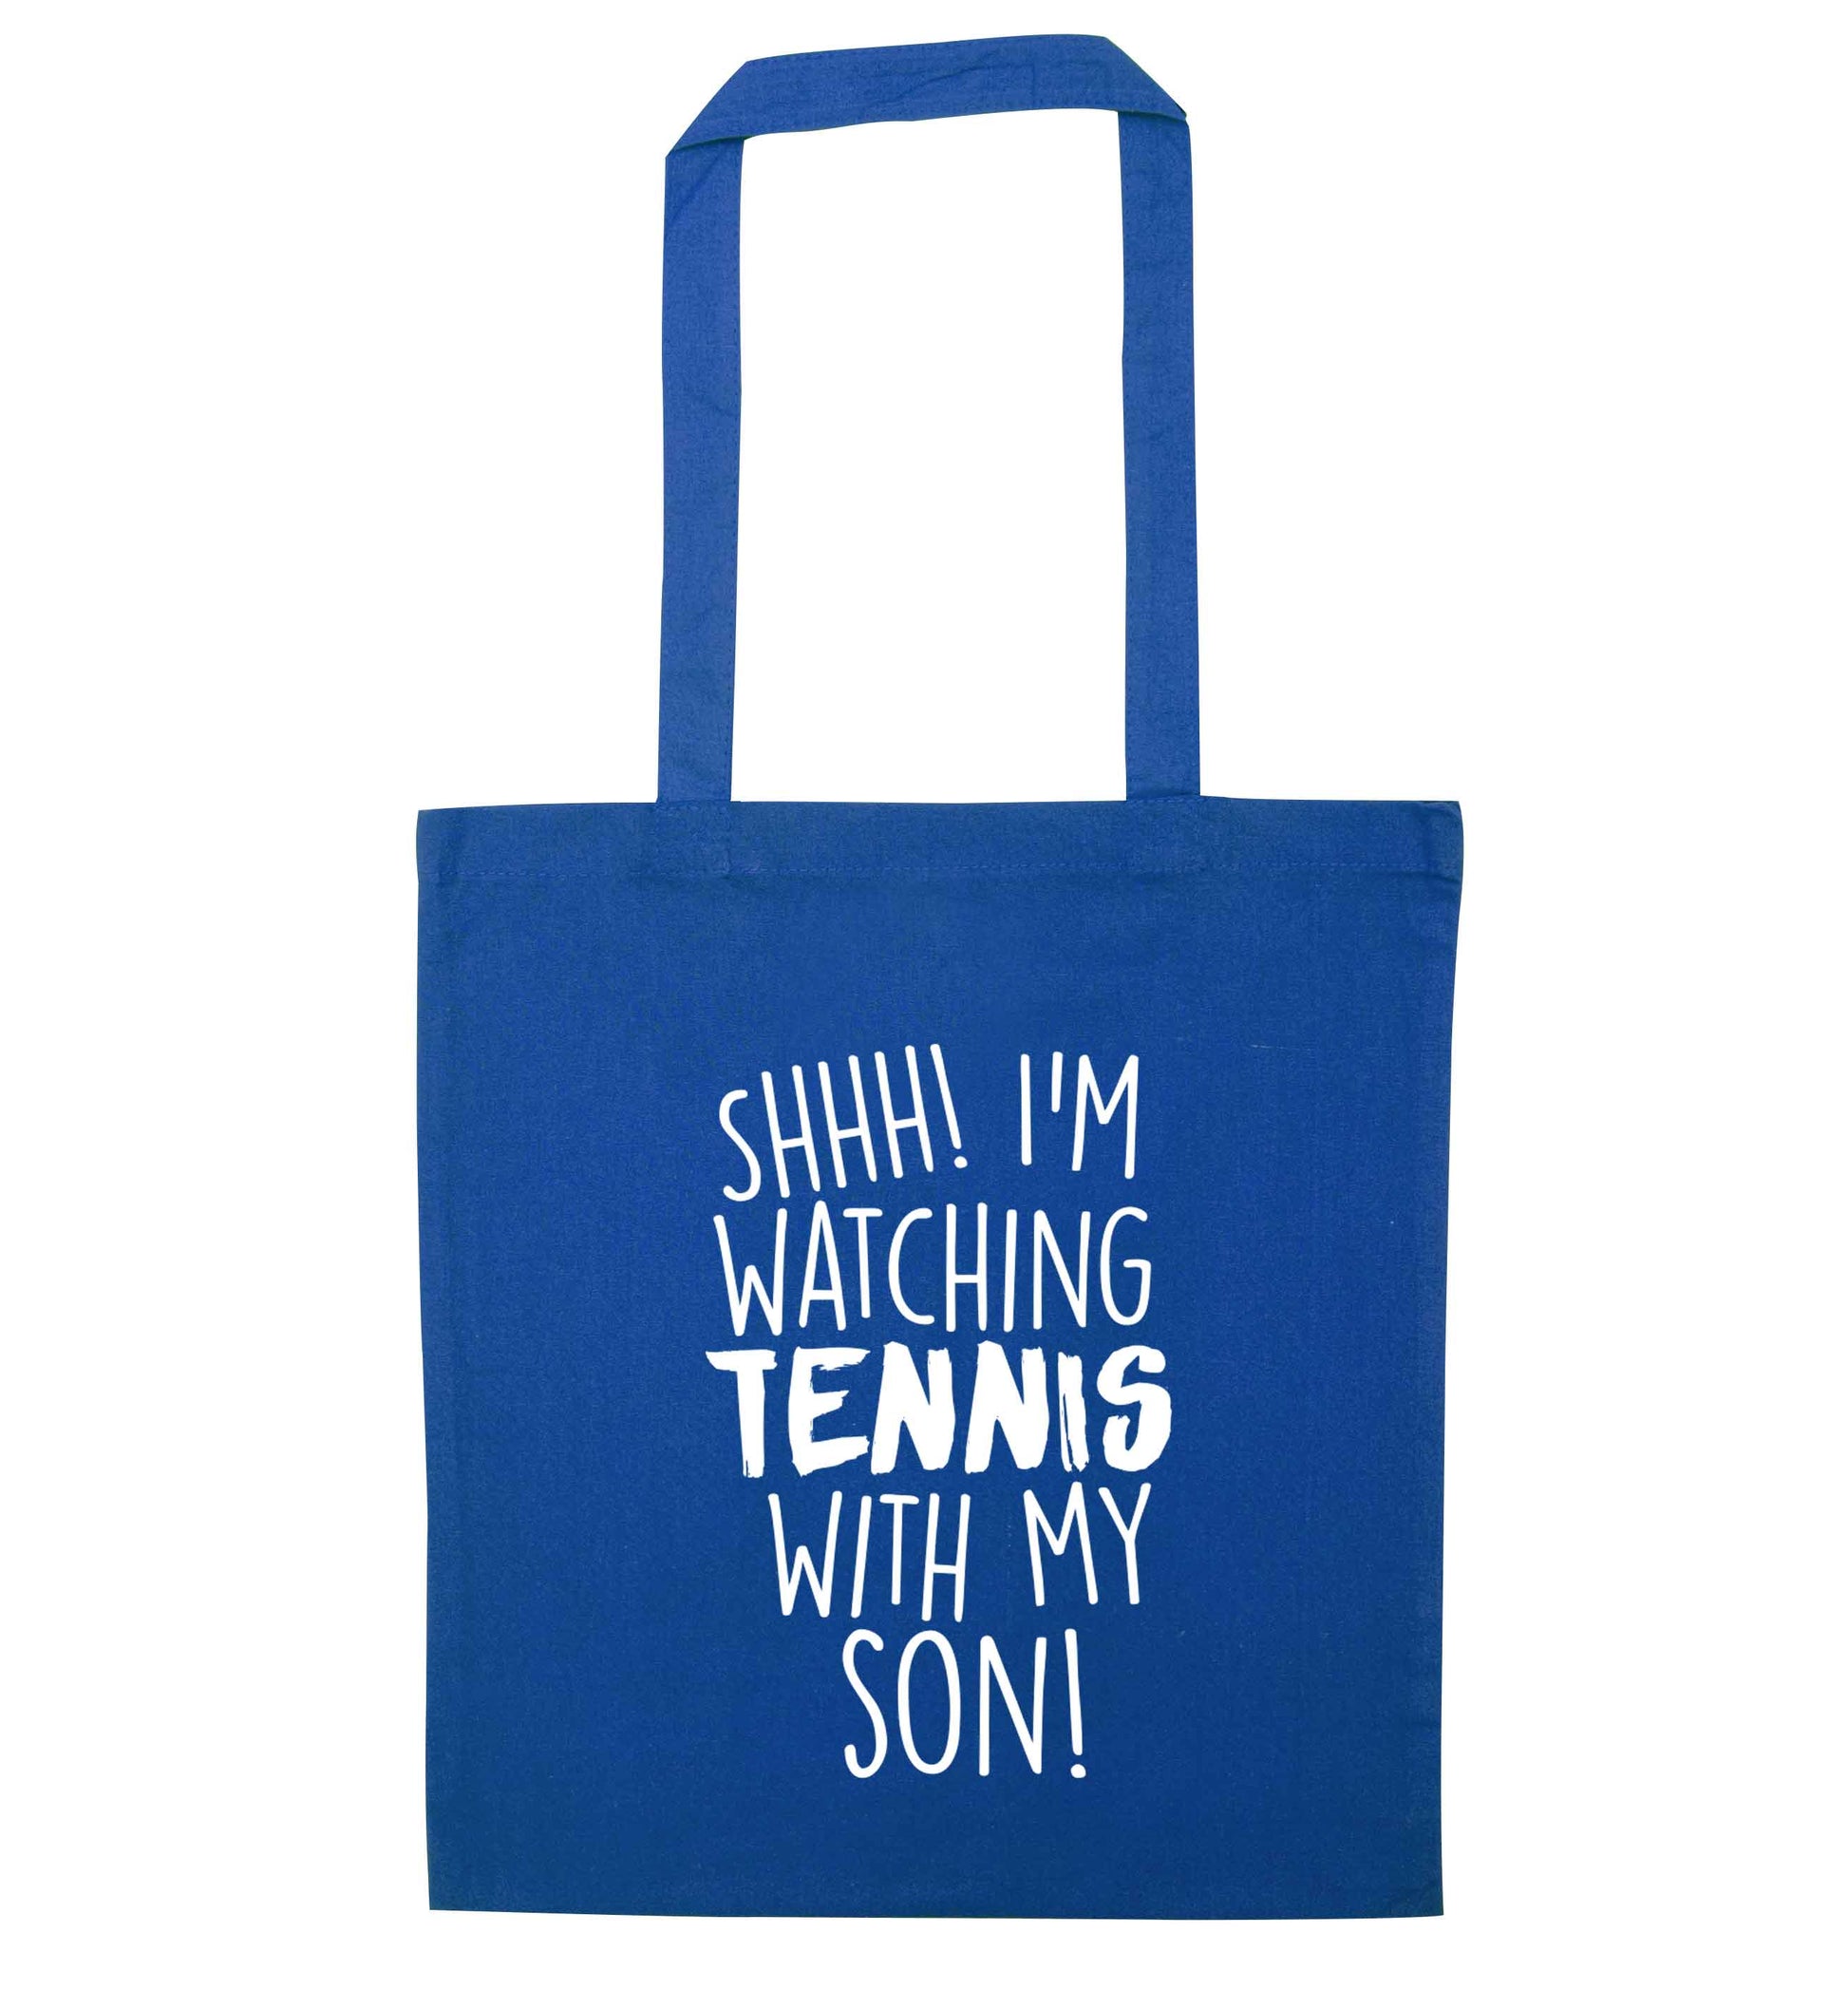 Shh! I'm watching tennis with my son! blue tote bag